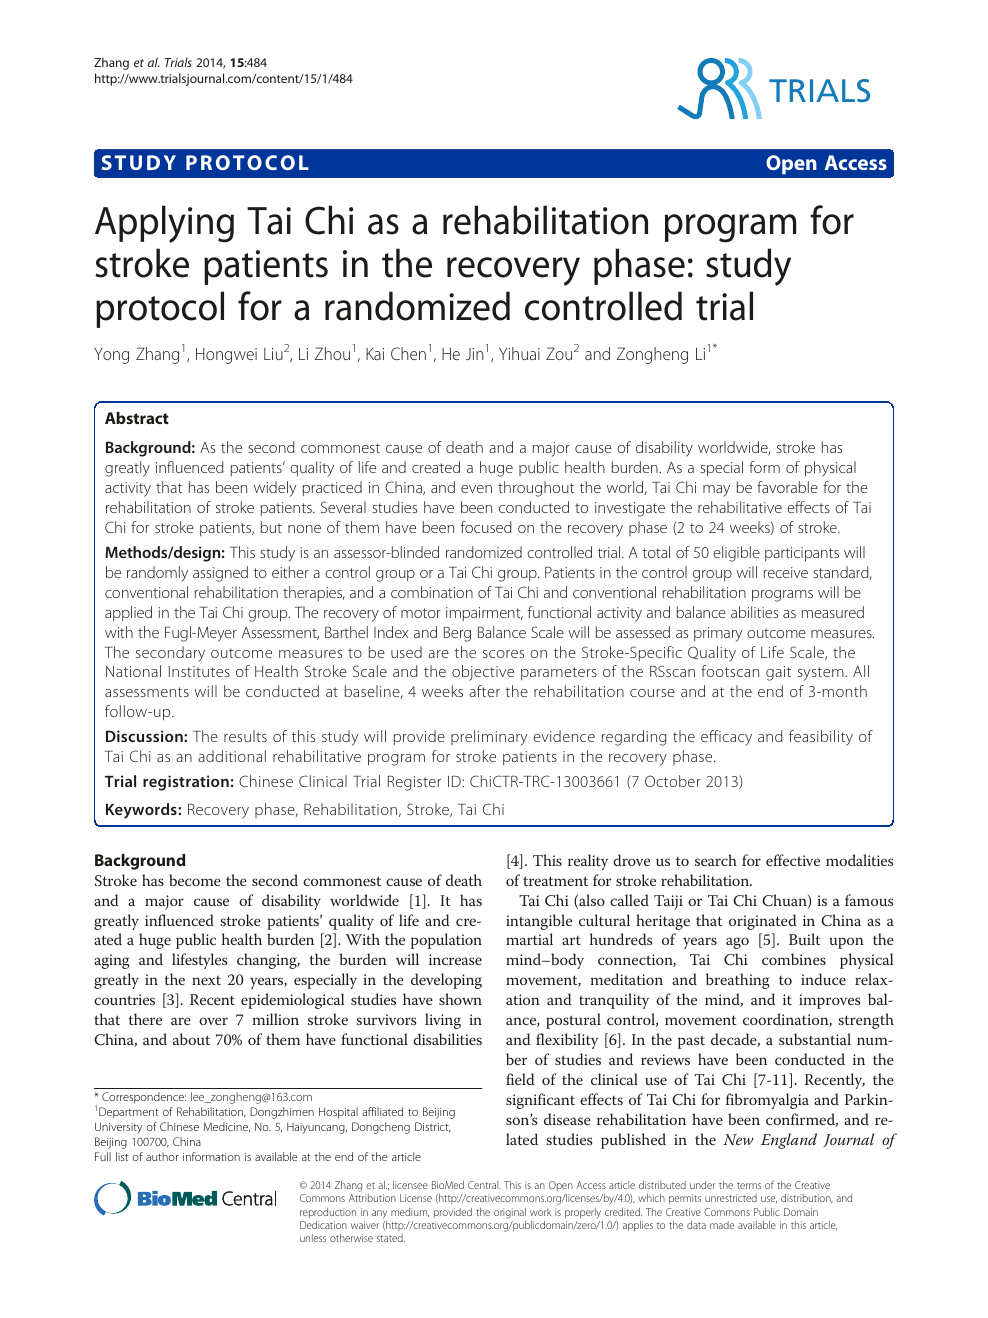 Applying Tai Chi As A Rehabilitation Program For Stroke Patients In The Recovery Phase Study Protocol For A Randomized Controlled Trial Topic Of Research Paper In Psychology Download Scholarly Article Pdf